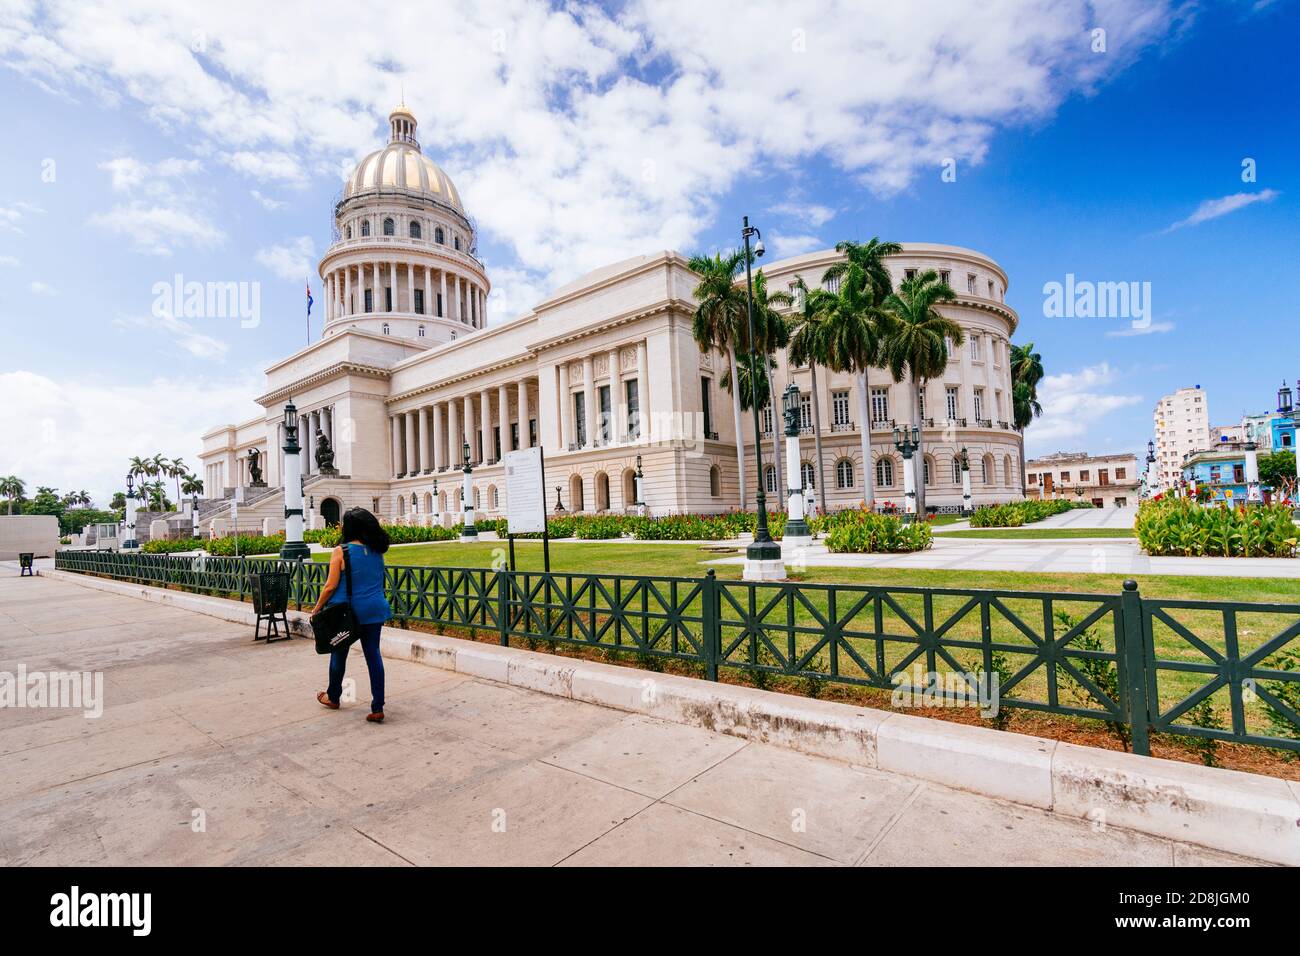 El Capitolio, or the National Capitol Building - Capitolio Nacional de La Habana - is a public edifice and one of the most visited sites in Havana, ca Stock Photo